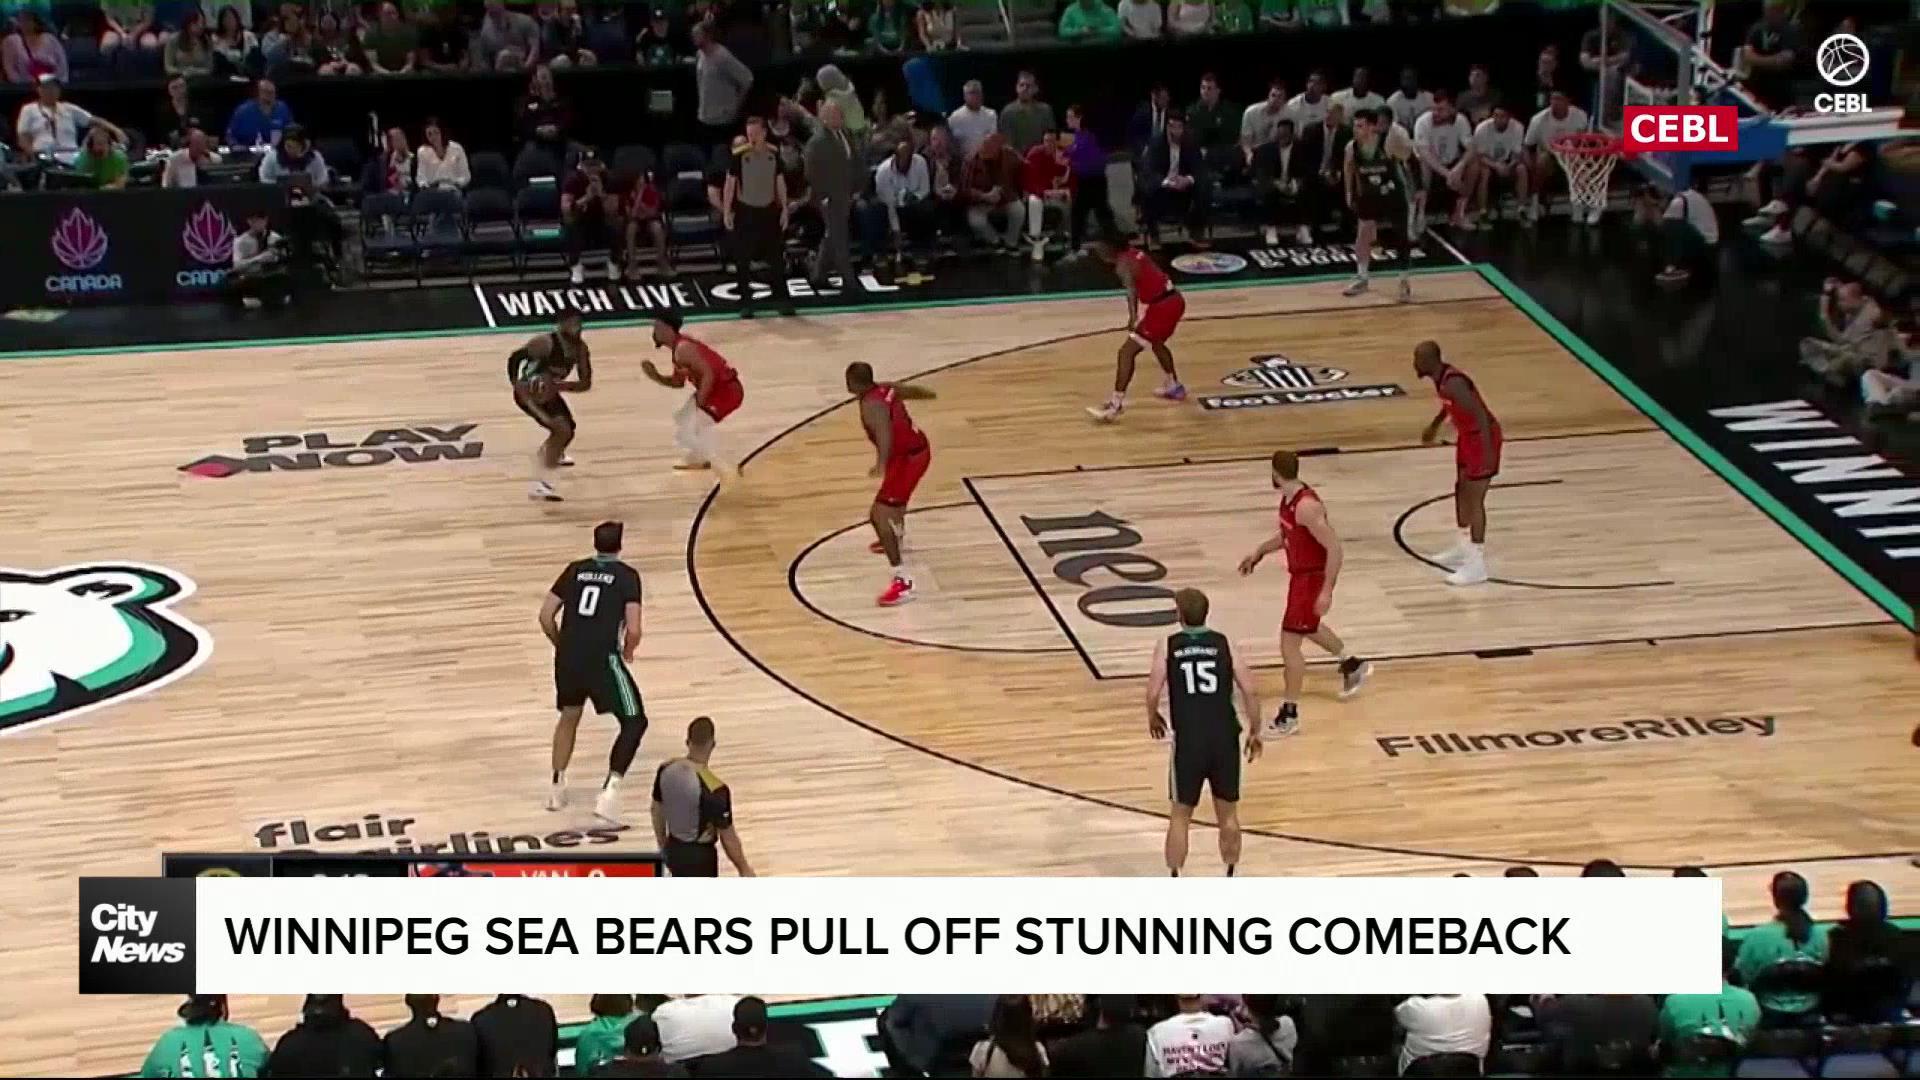 Winnipeg Sea Bears pull off stunning comeback in 1st game without former MVP